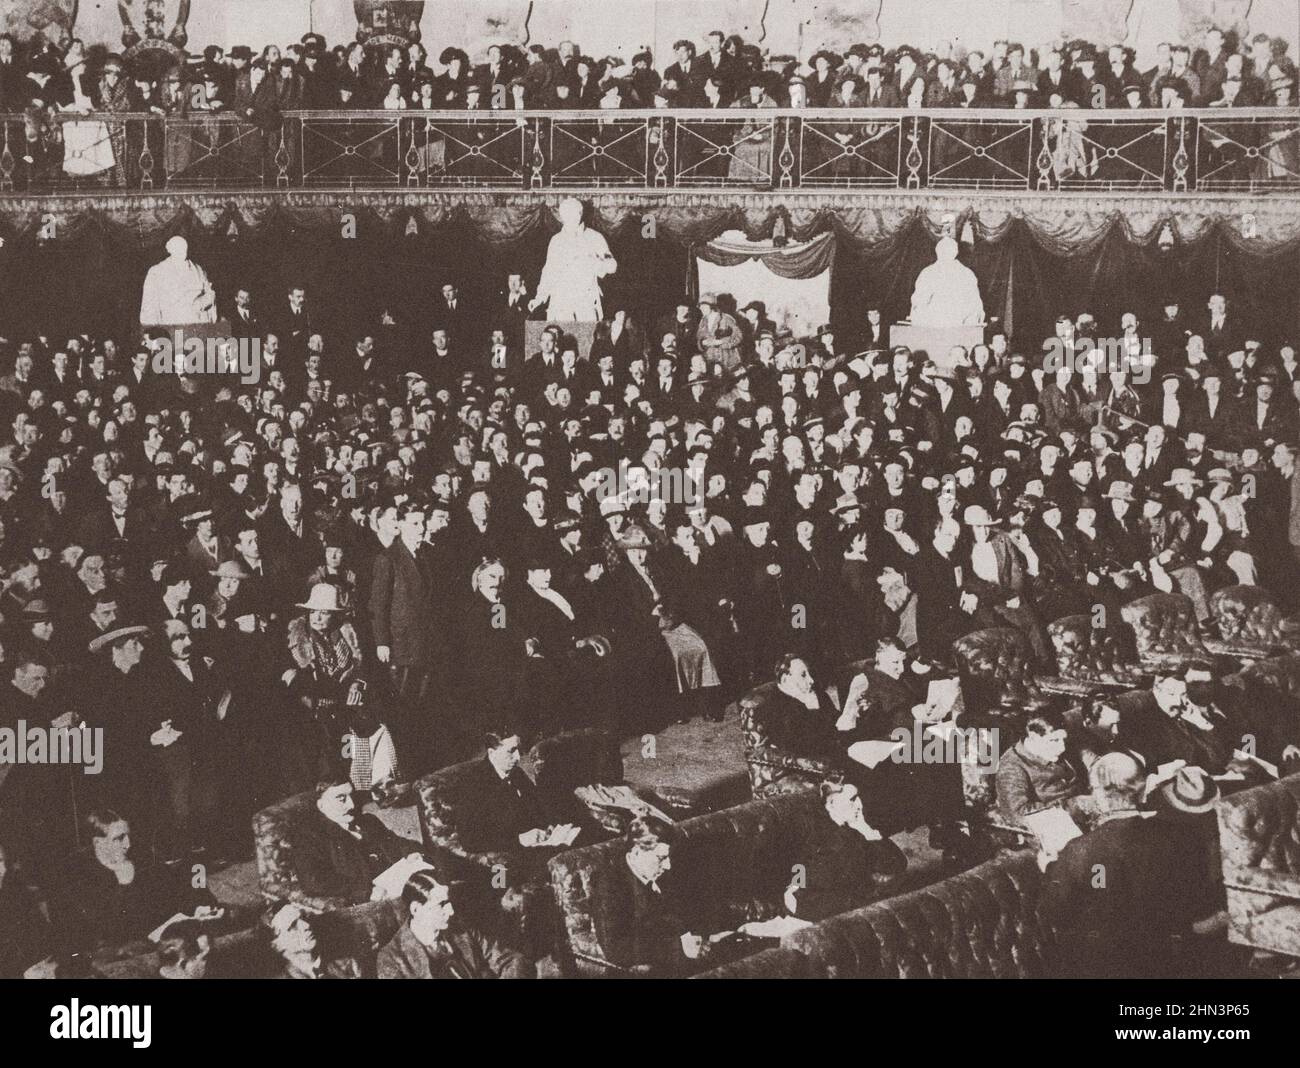 Irish 'Parliament' in Session in Mansion House, Dublin, Ireland. February 27, 1919 Historical opening sitting of Irish Constituent Assembly, Sien Fein Stock Photo